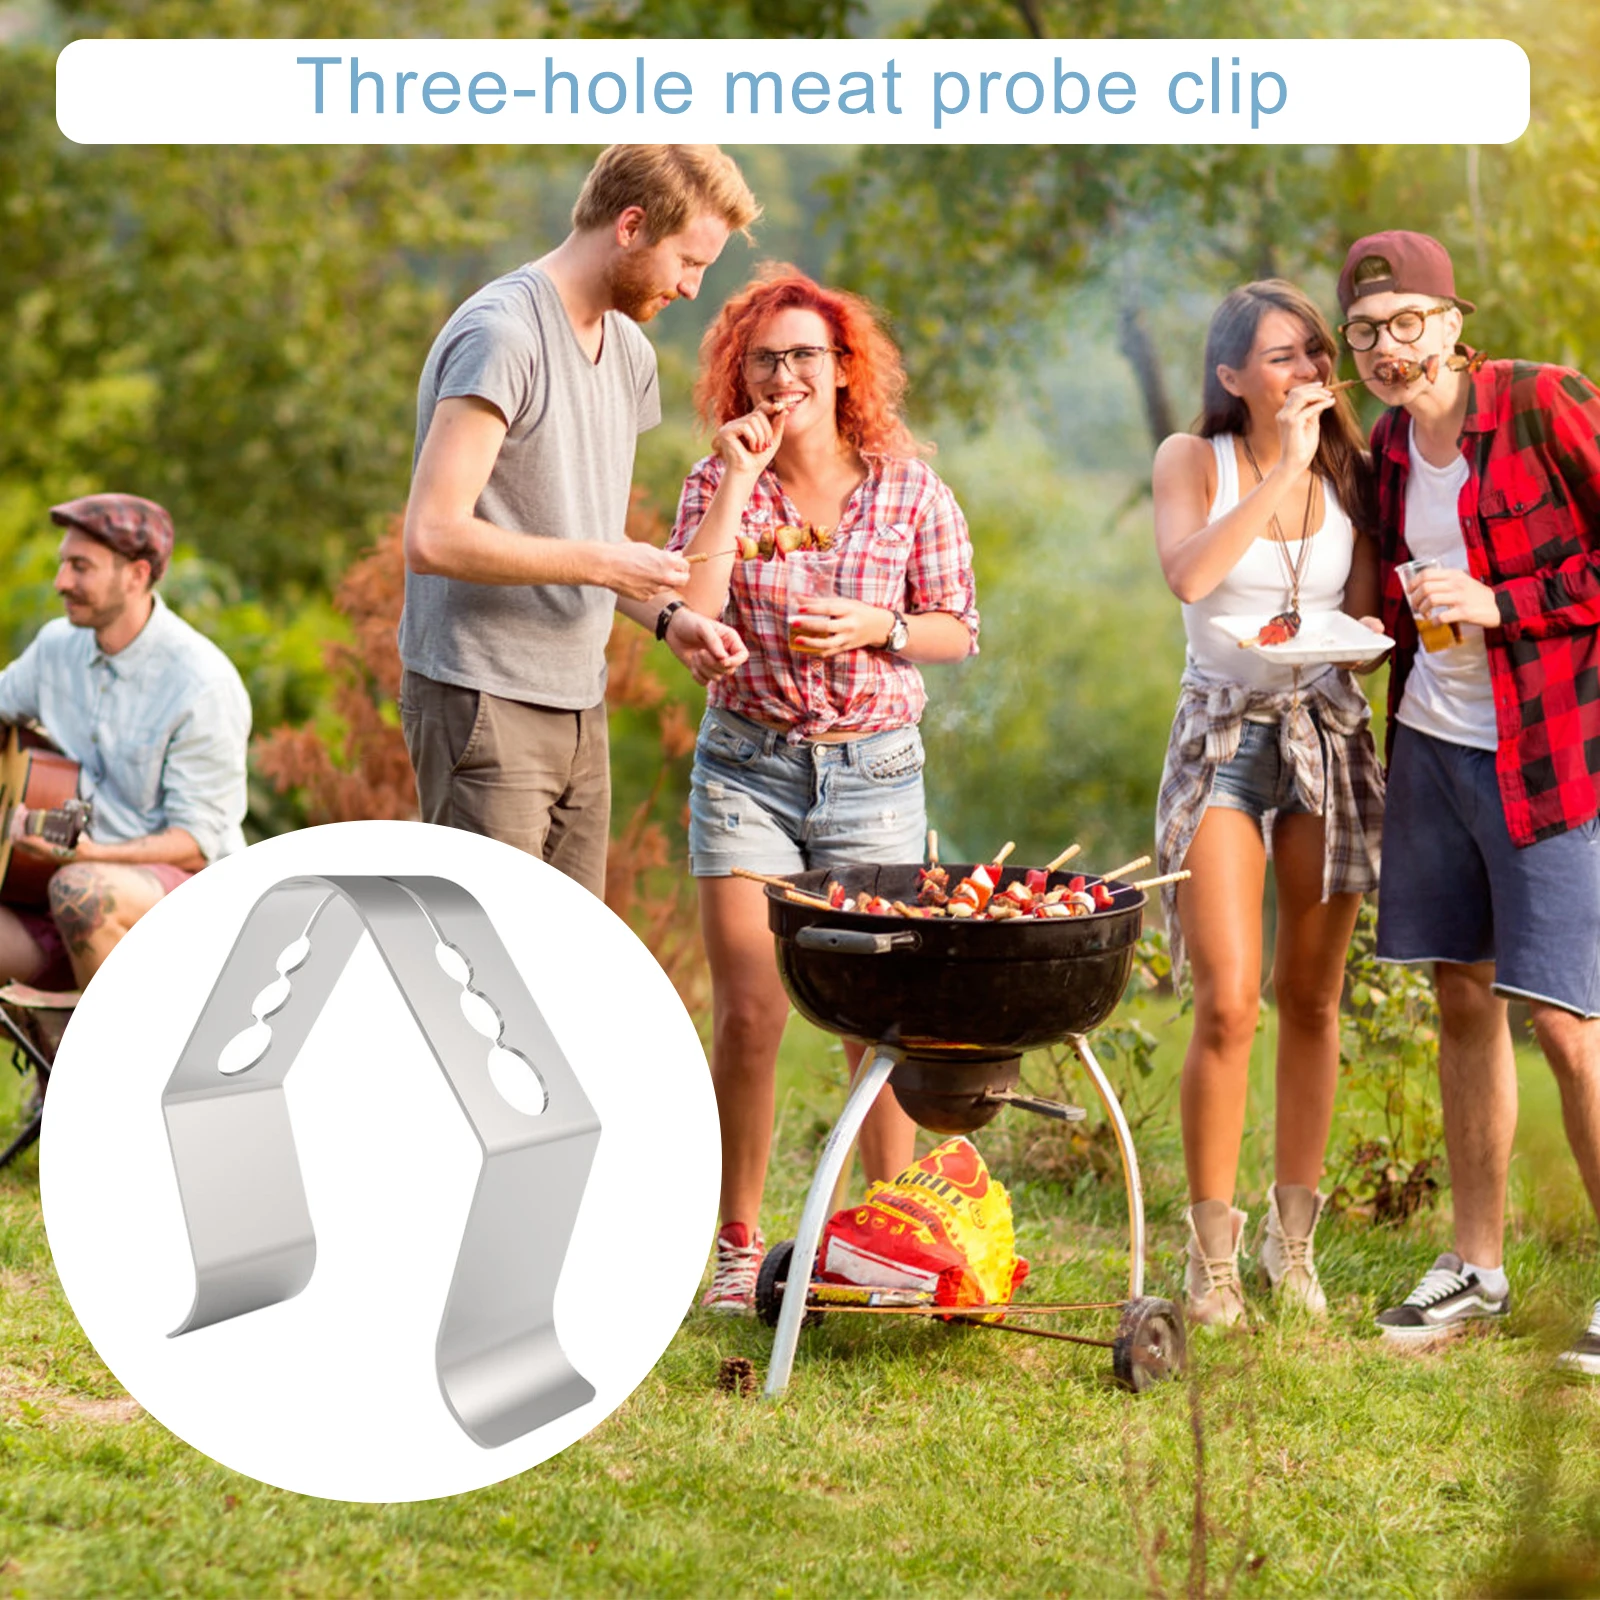 https://ae01.alicdn.com/kf/S325c310144224fc69100494d5ab53abdq/2PCS-Stainless-Steel-Grill-Clip-Meat-Thermometer-Probe-Clip-Holder-Ambient-Temperature-Readings-BBQ-Oven-Grill.jpg